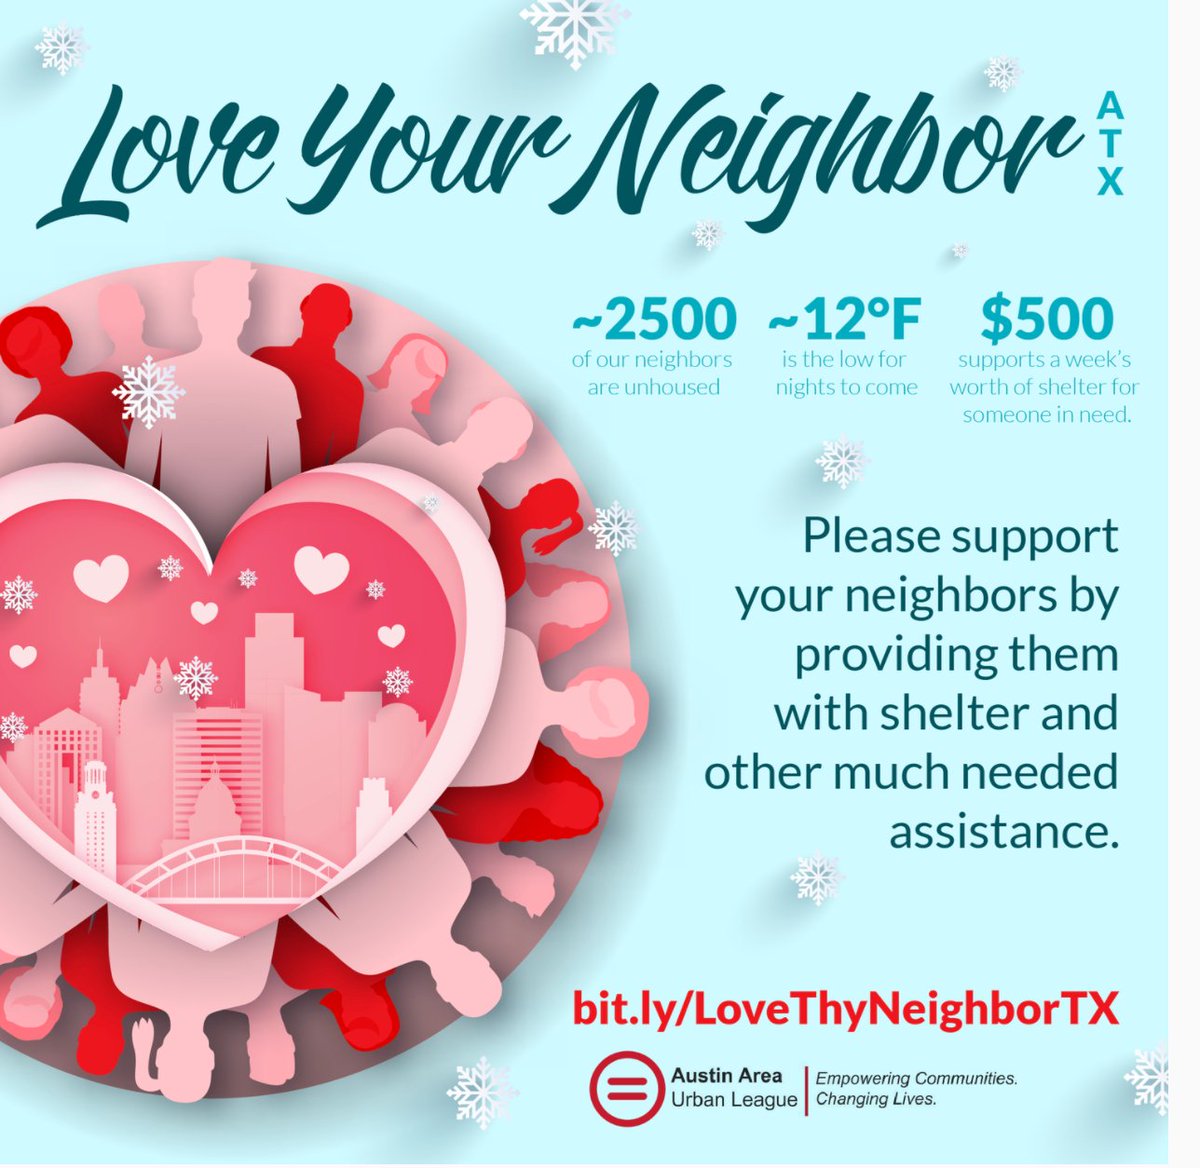 The Austin Area Urban League  https://aaul.org  has an emergency donation drive for the housing insecure in Austin, Texas. Donate and pass it on using hashtag  #LoveThyNeighborTX /4